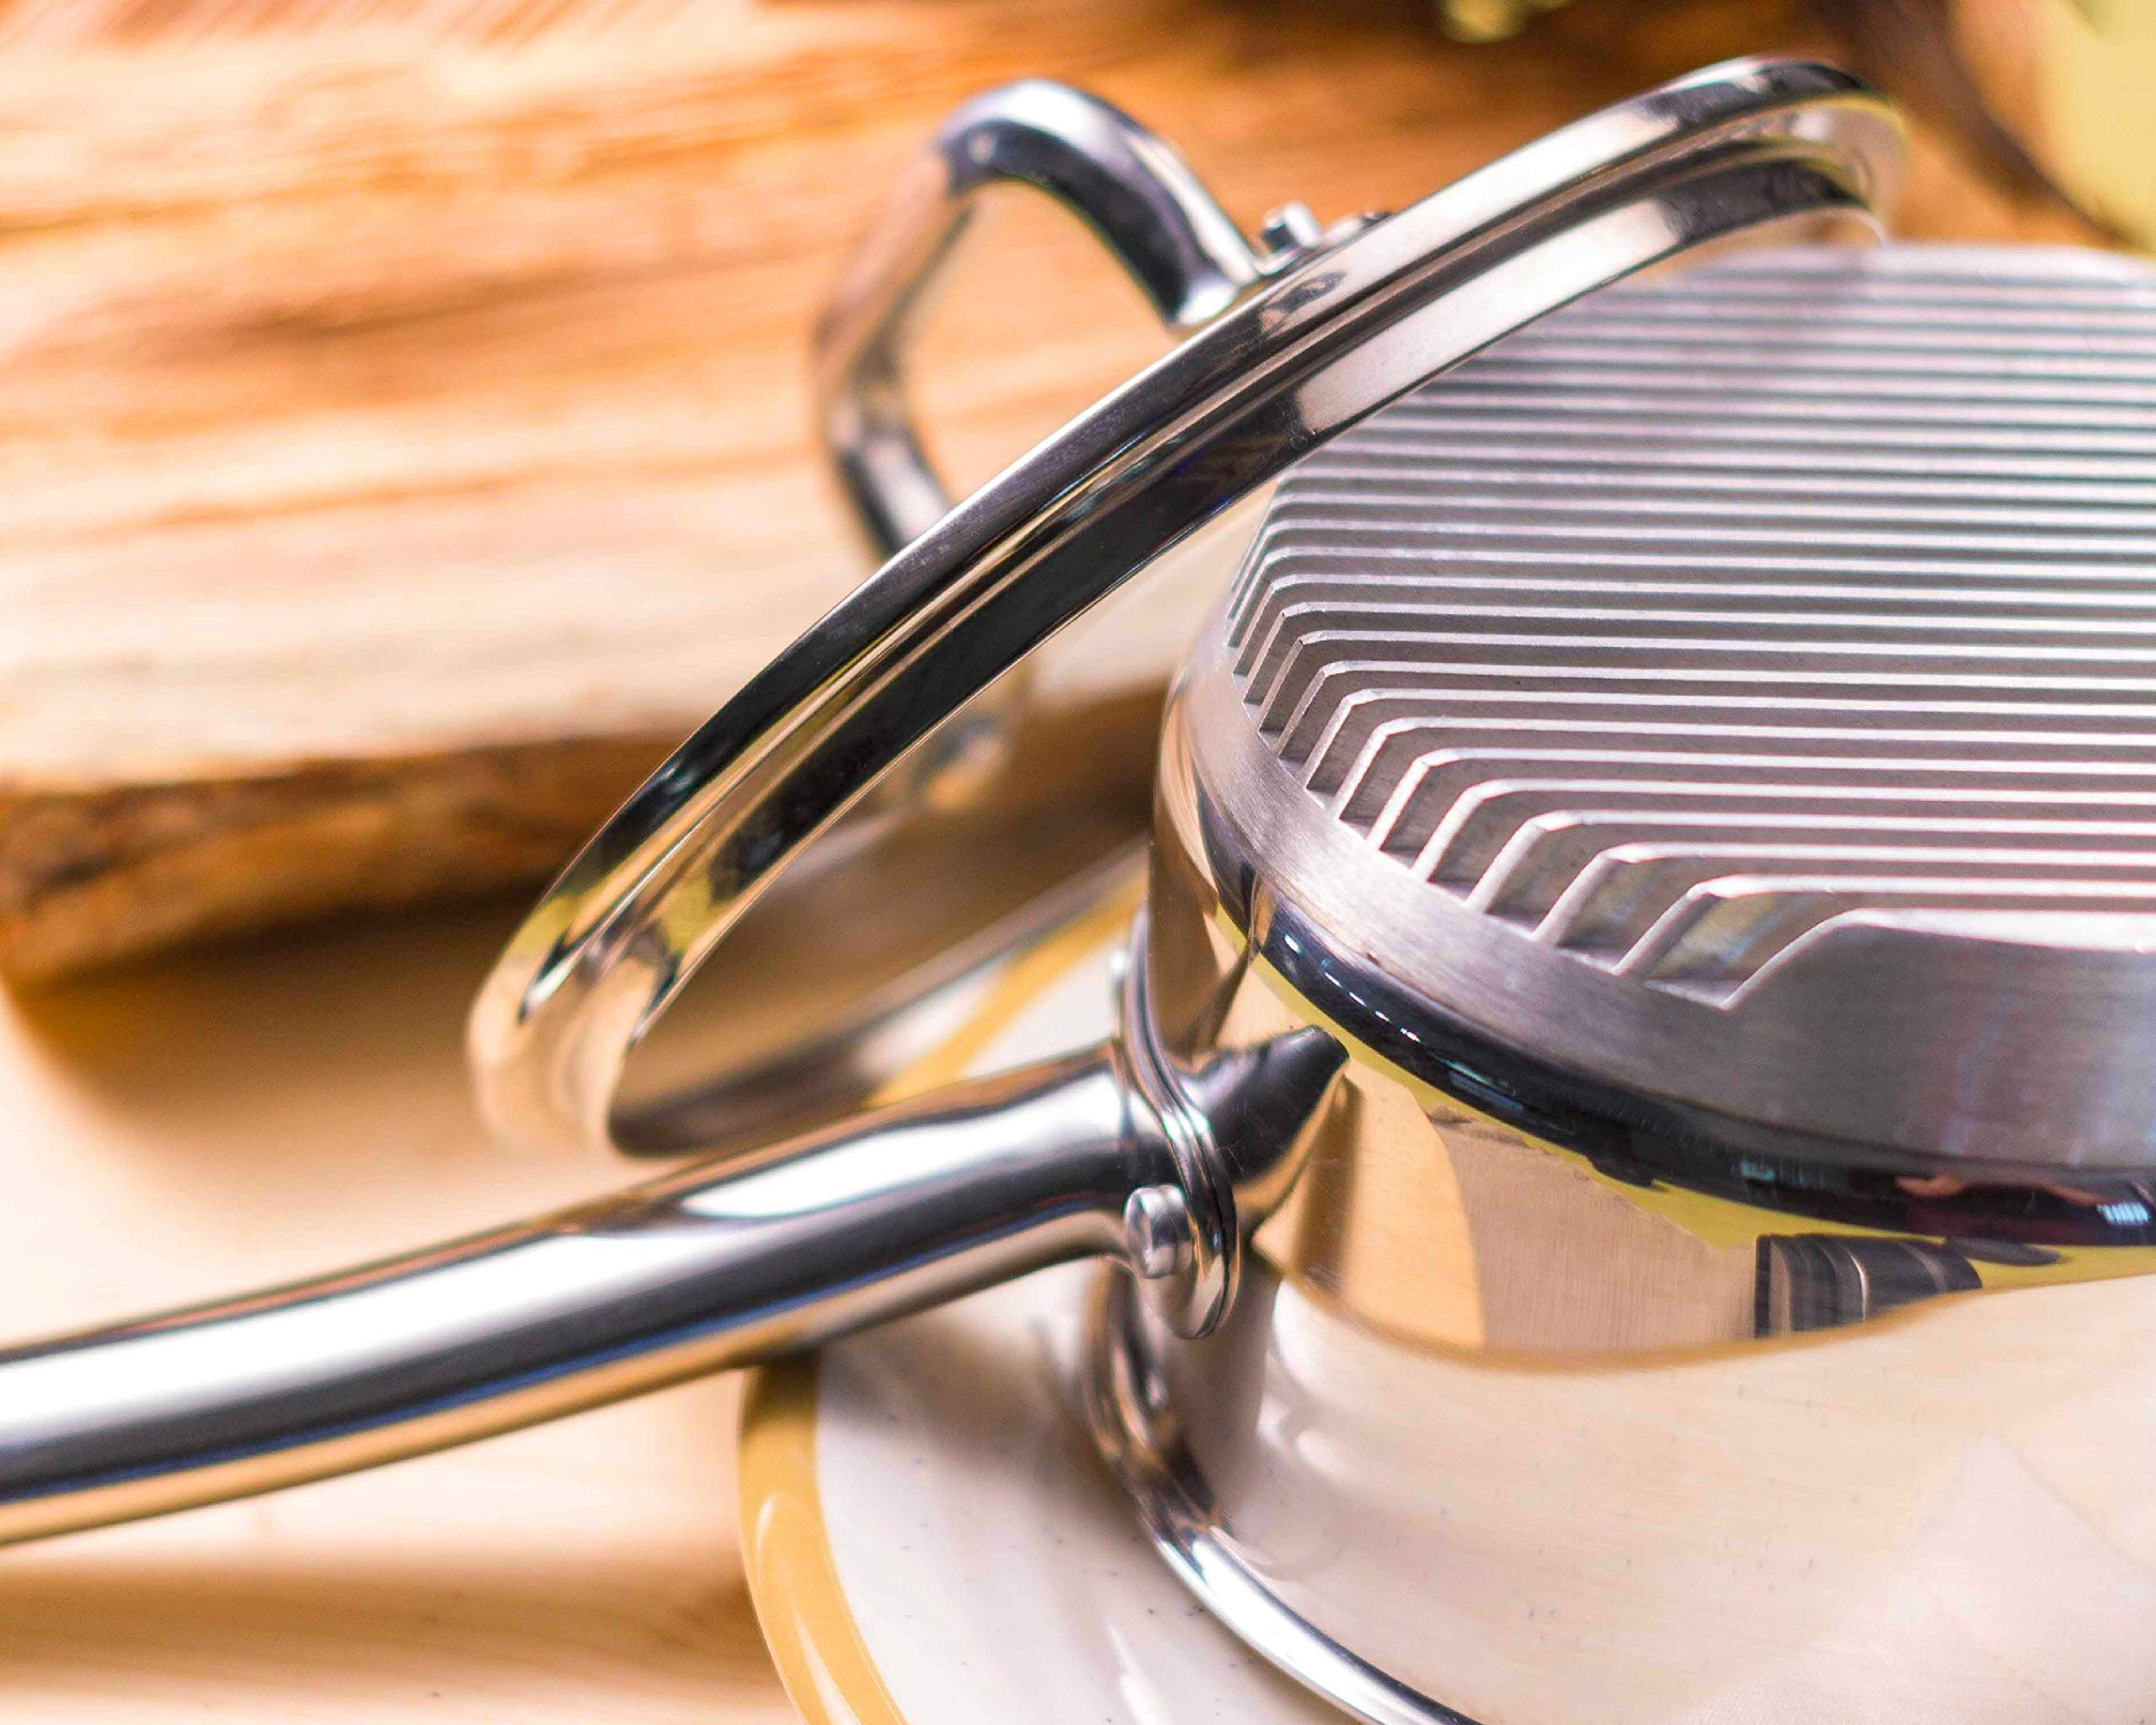 Turbo Pot® FreshAir™ Rapid Boil Stainless Steel 2 qt. Sauce Pan, time-and-energy saving cookware for gas stove Metallic